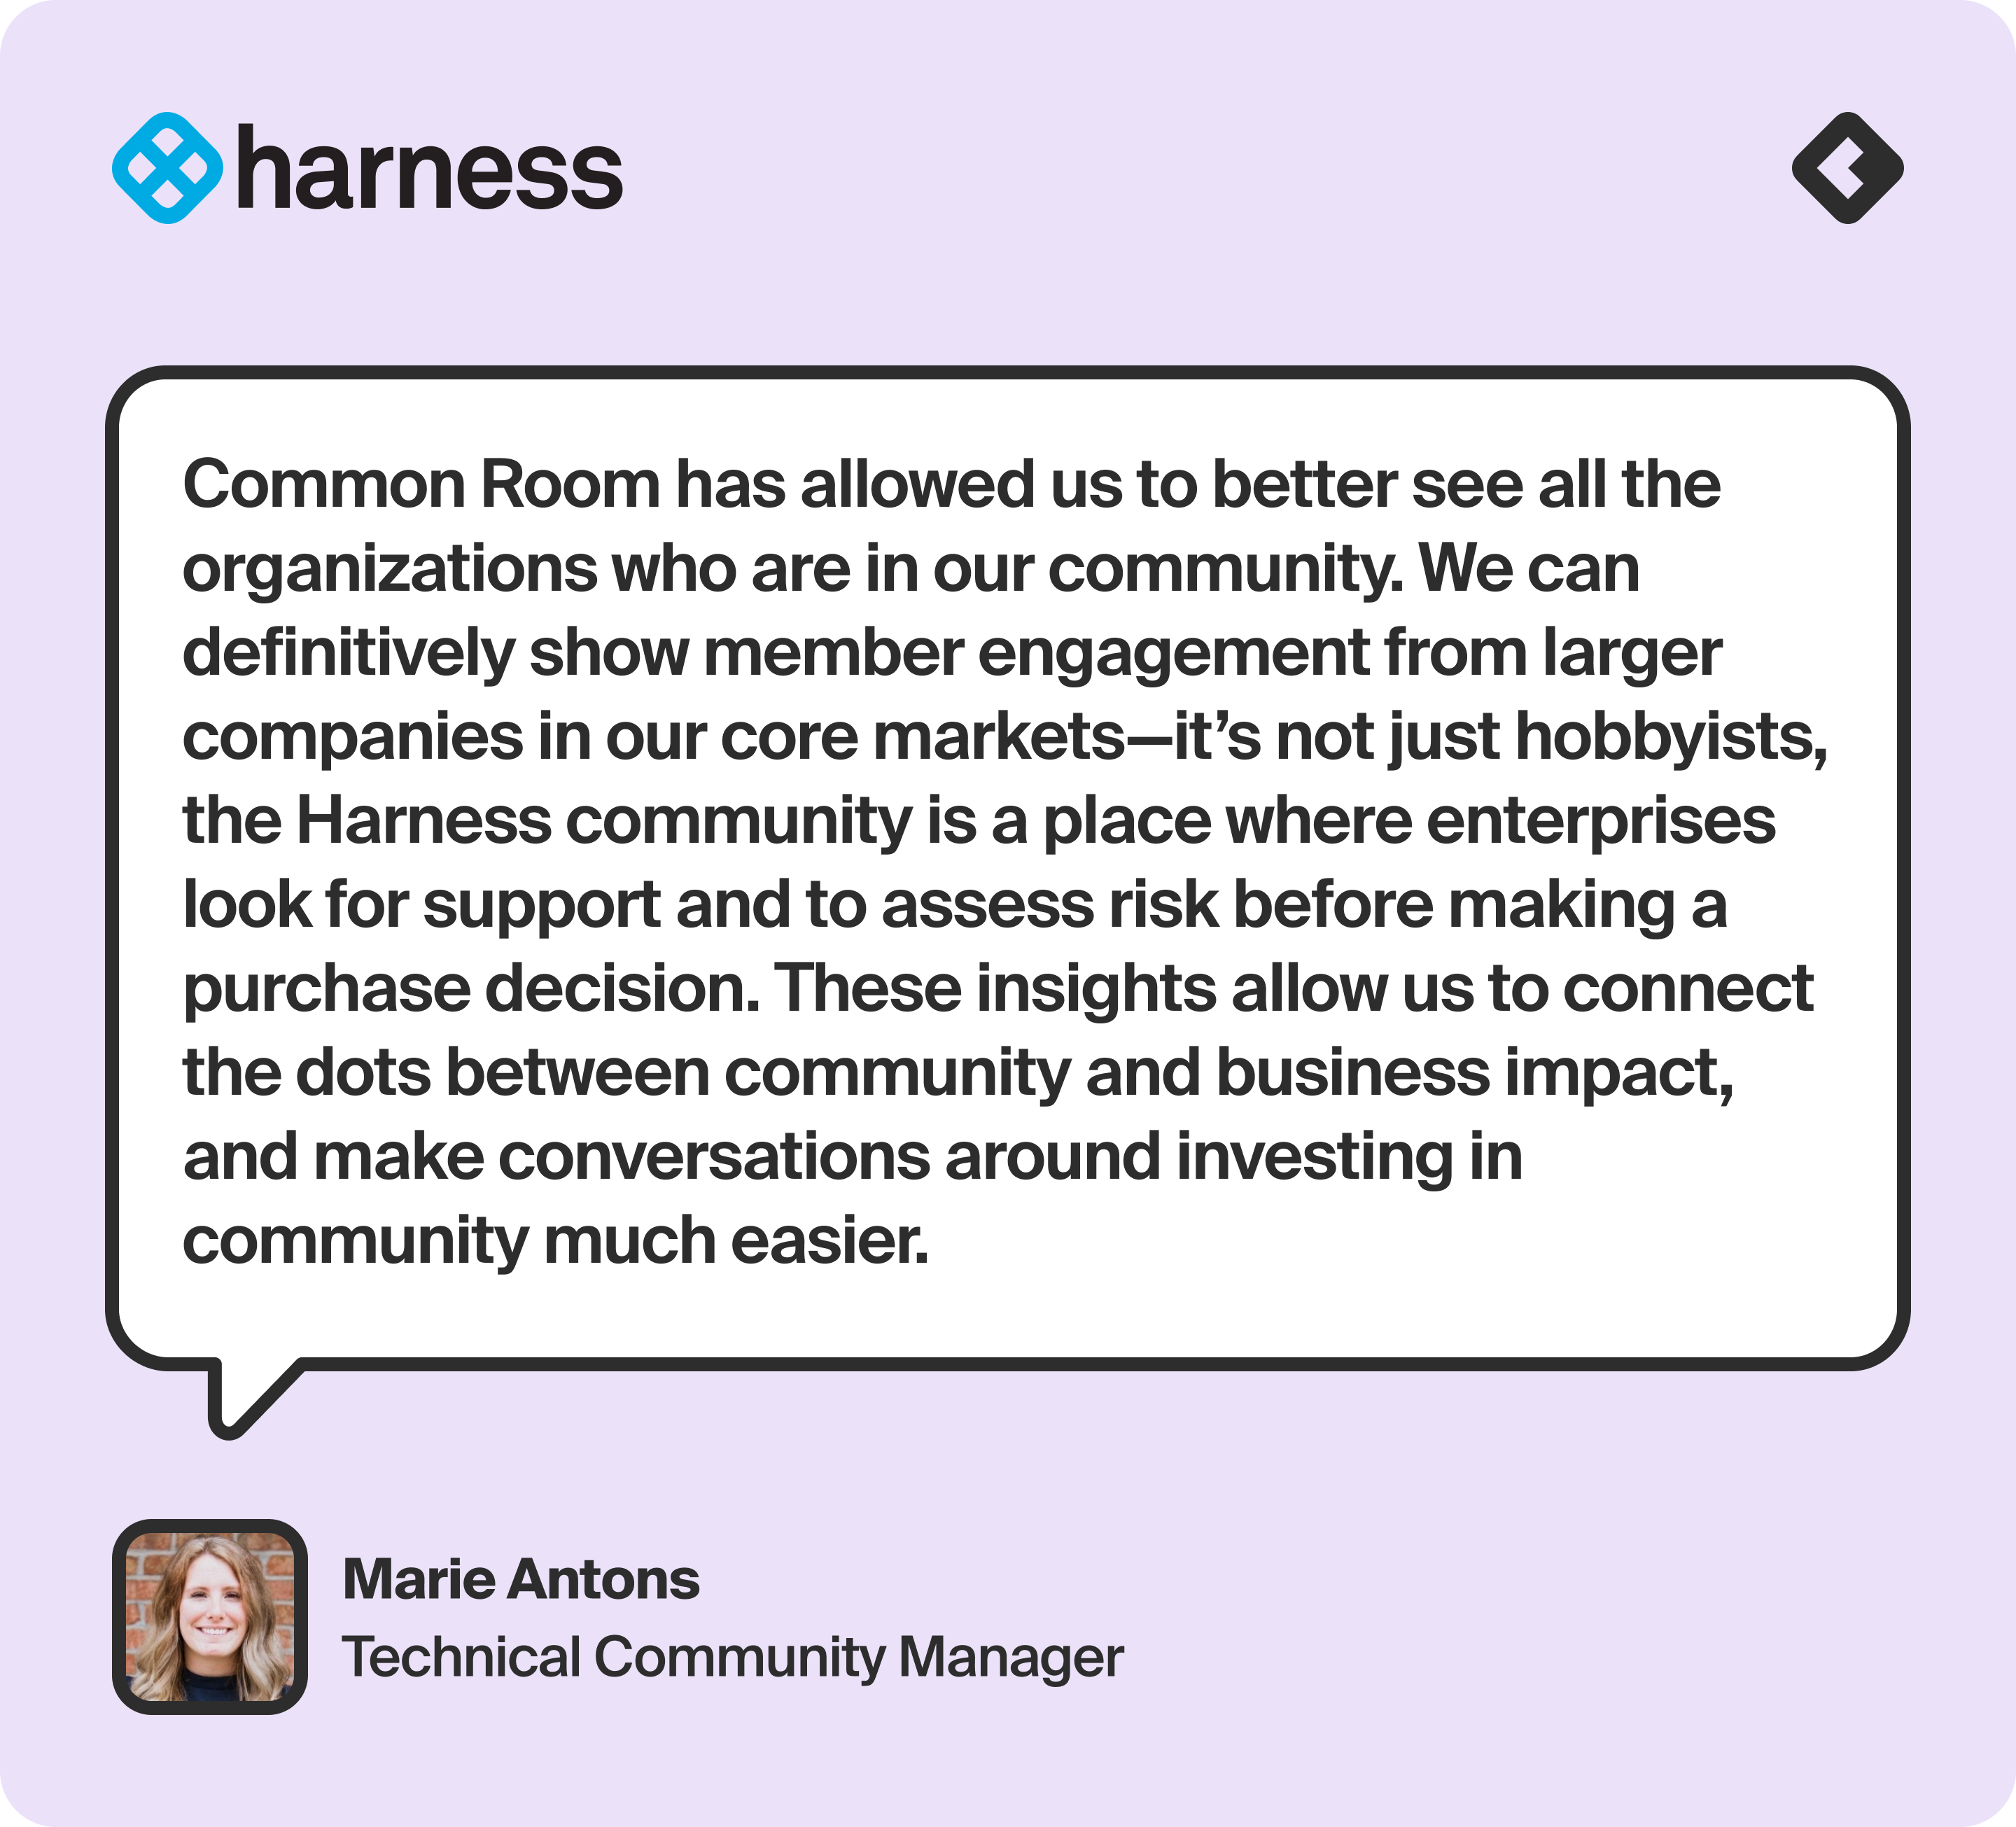 “Common Room has allowed us to better see all the organizations who are in our community. We can definitively show member engagement from larger companies in our core markets—it’s not just hobbyists, the Harness community is a place where enterprises look for support and to assess risk before making a purchase decision. These insights allow us to connect the dots between community and business impact, and make conversations around investing in community much easier.” — Marie Antons, Technical Community Manager at Harness